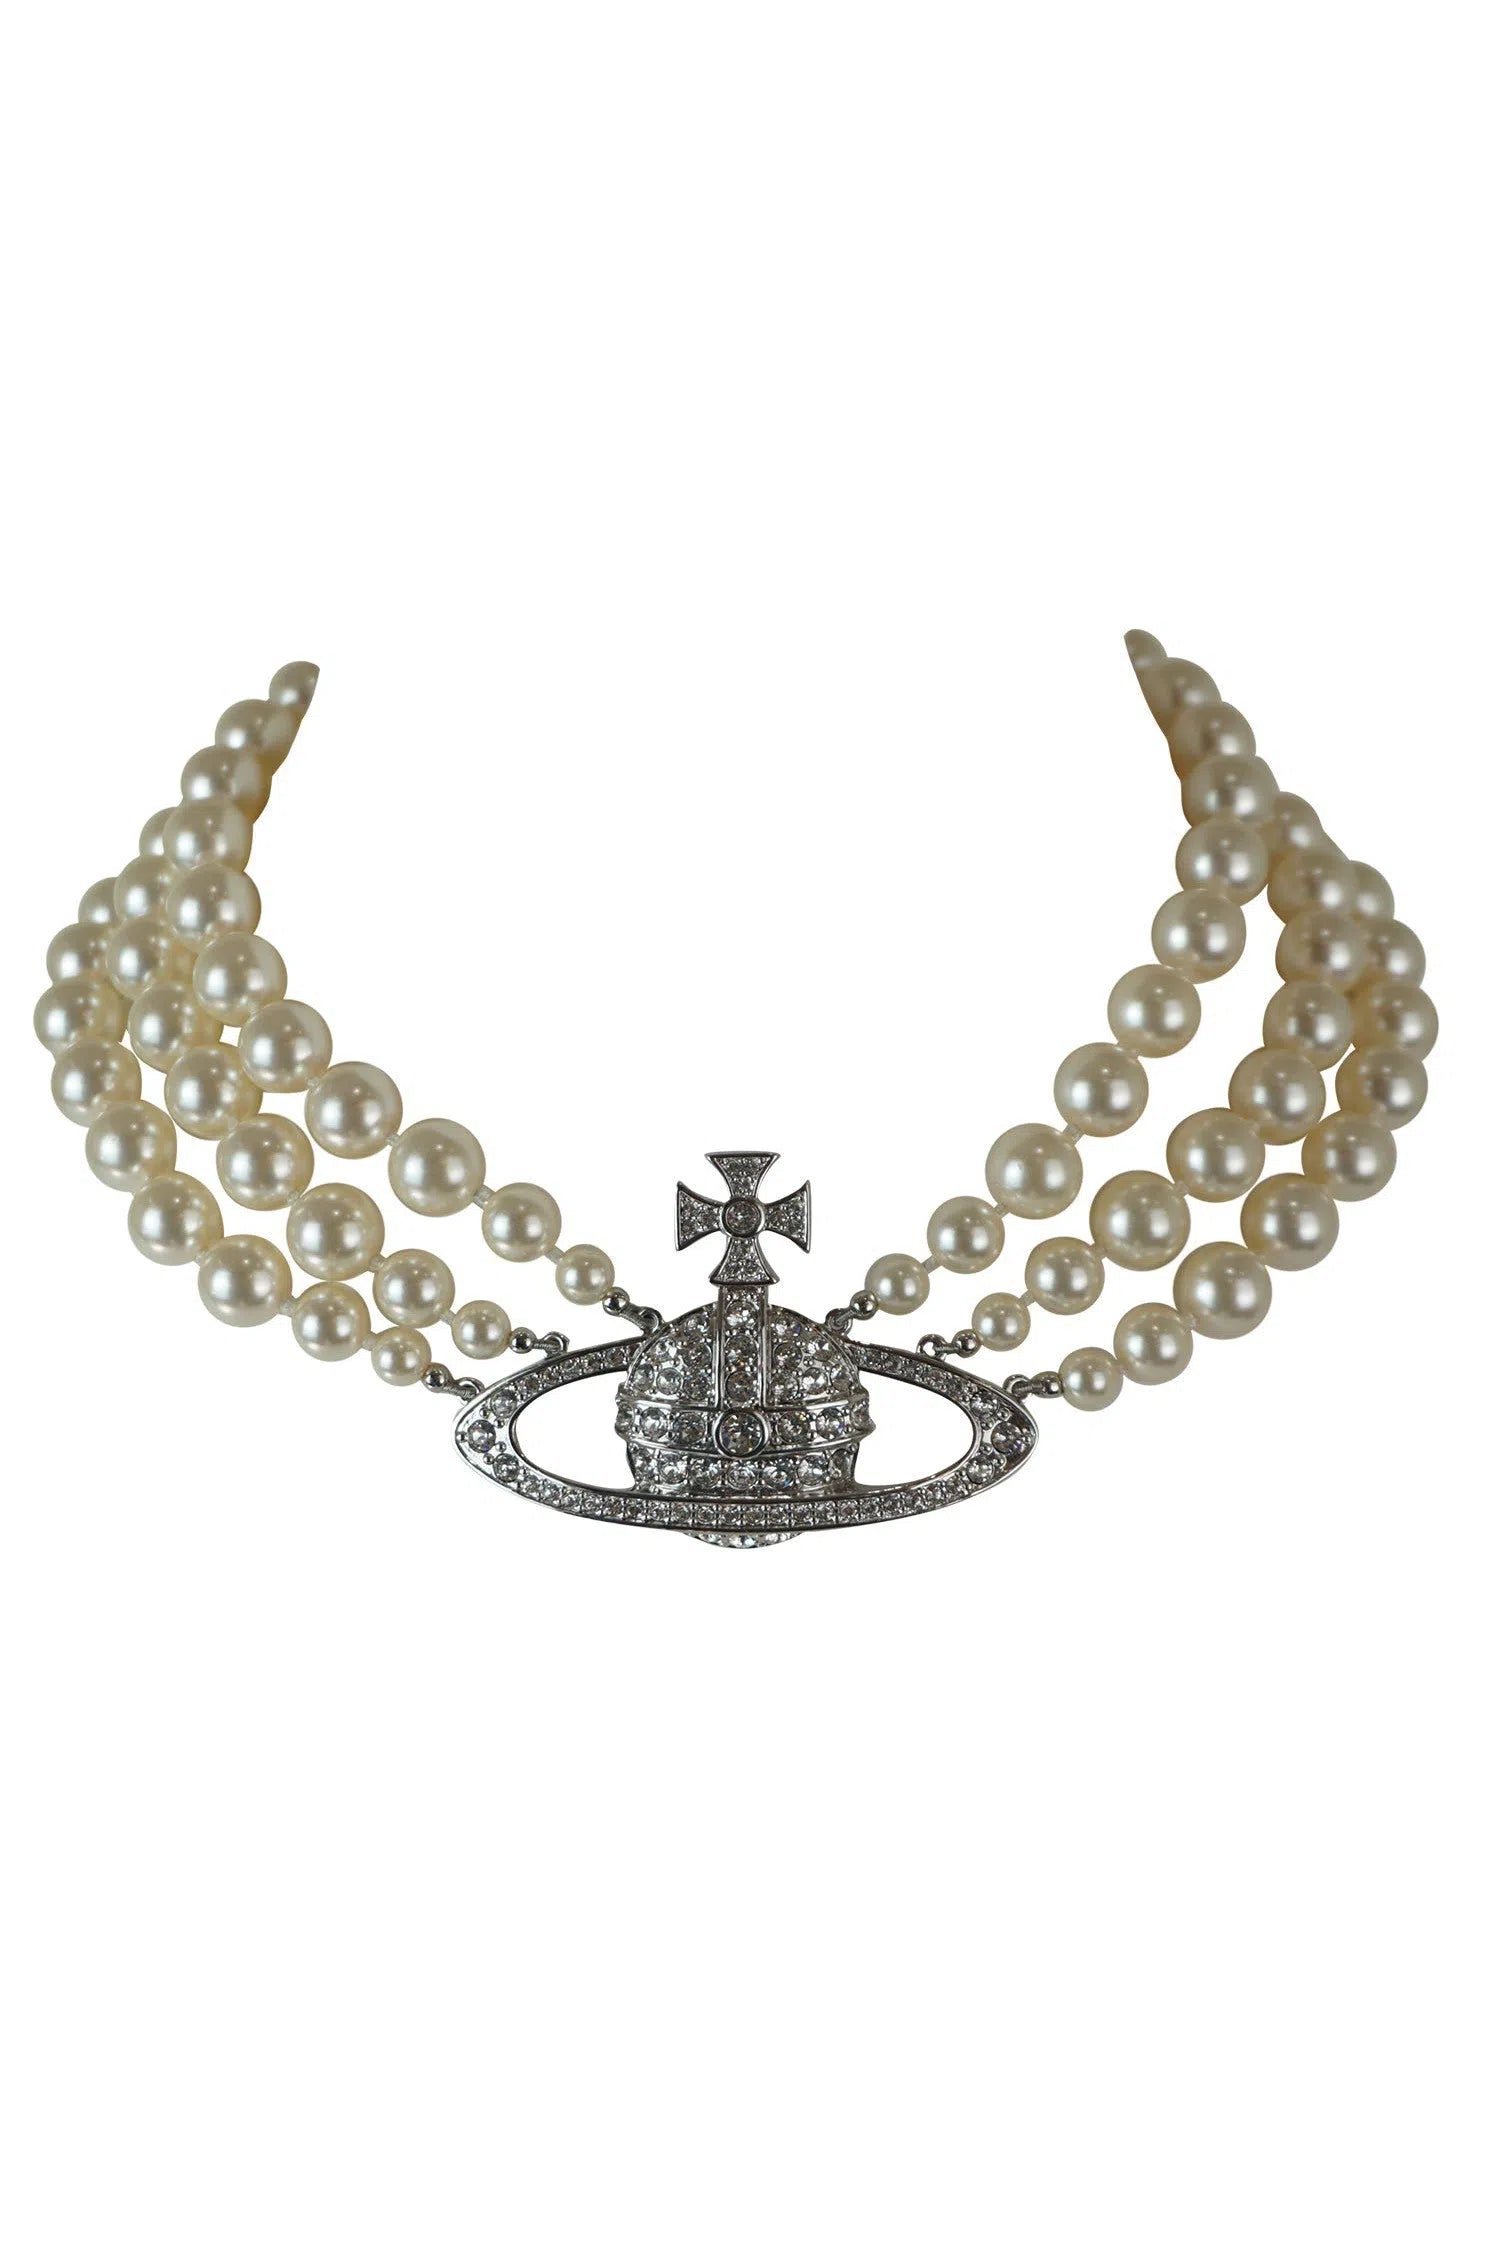 Vivienne Westwood Orb Bas Three Row Pearl Necklace - Foxy Couture Carmel